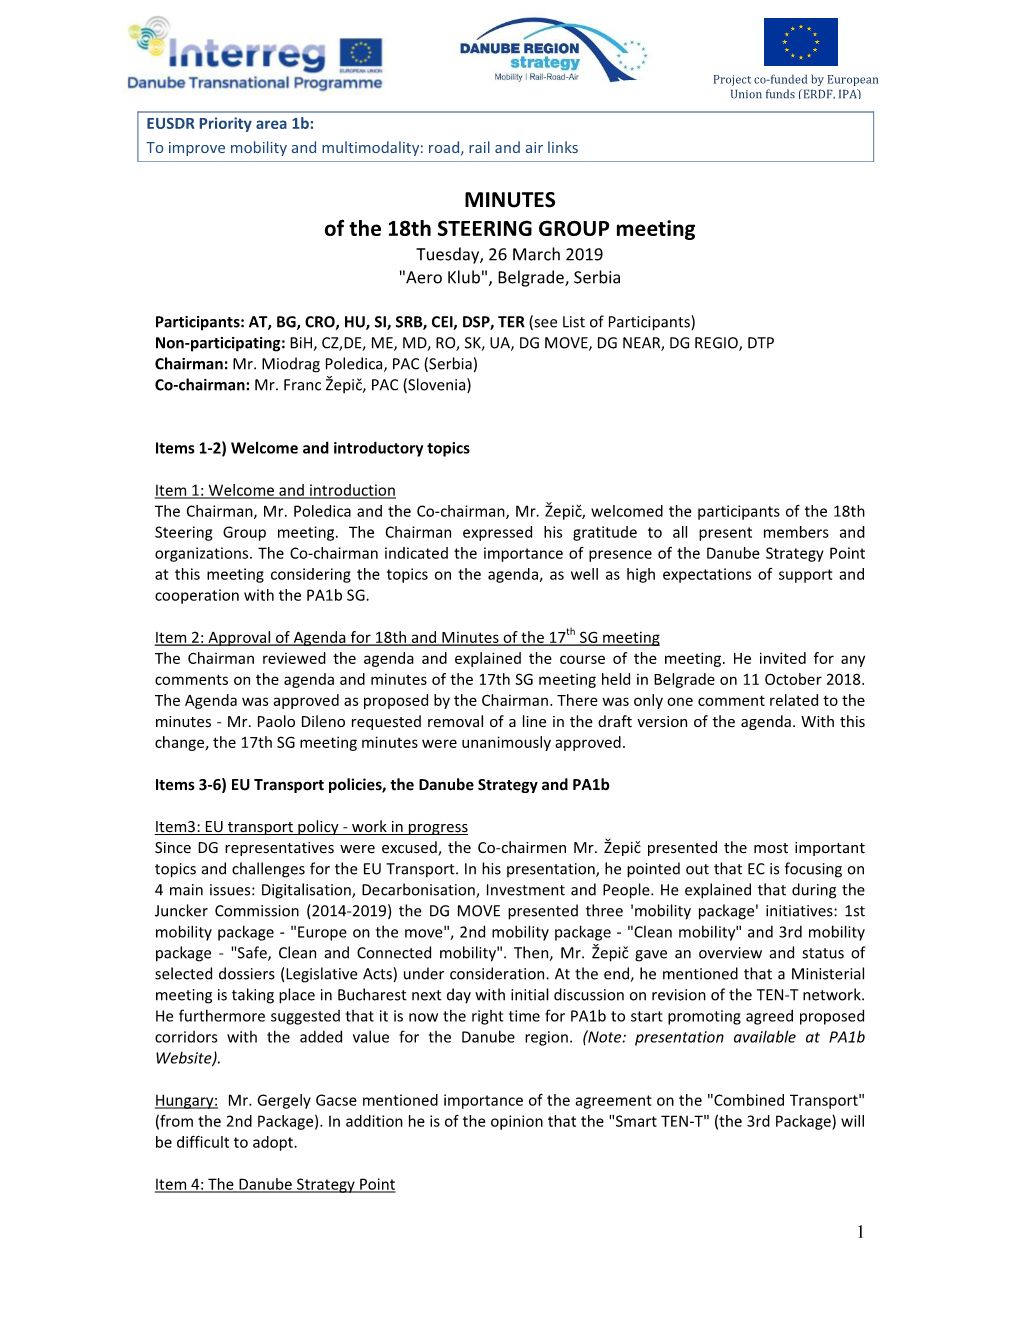 MINUTES of the 18Th STEERING GROUP Meeting Tuesday, 26 March 2019 "Aero Klub", Belgrade, Serbia